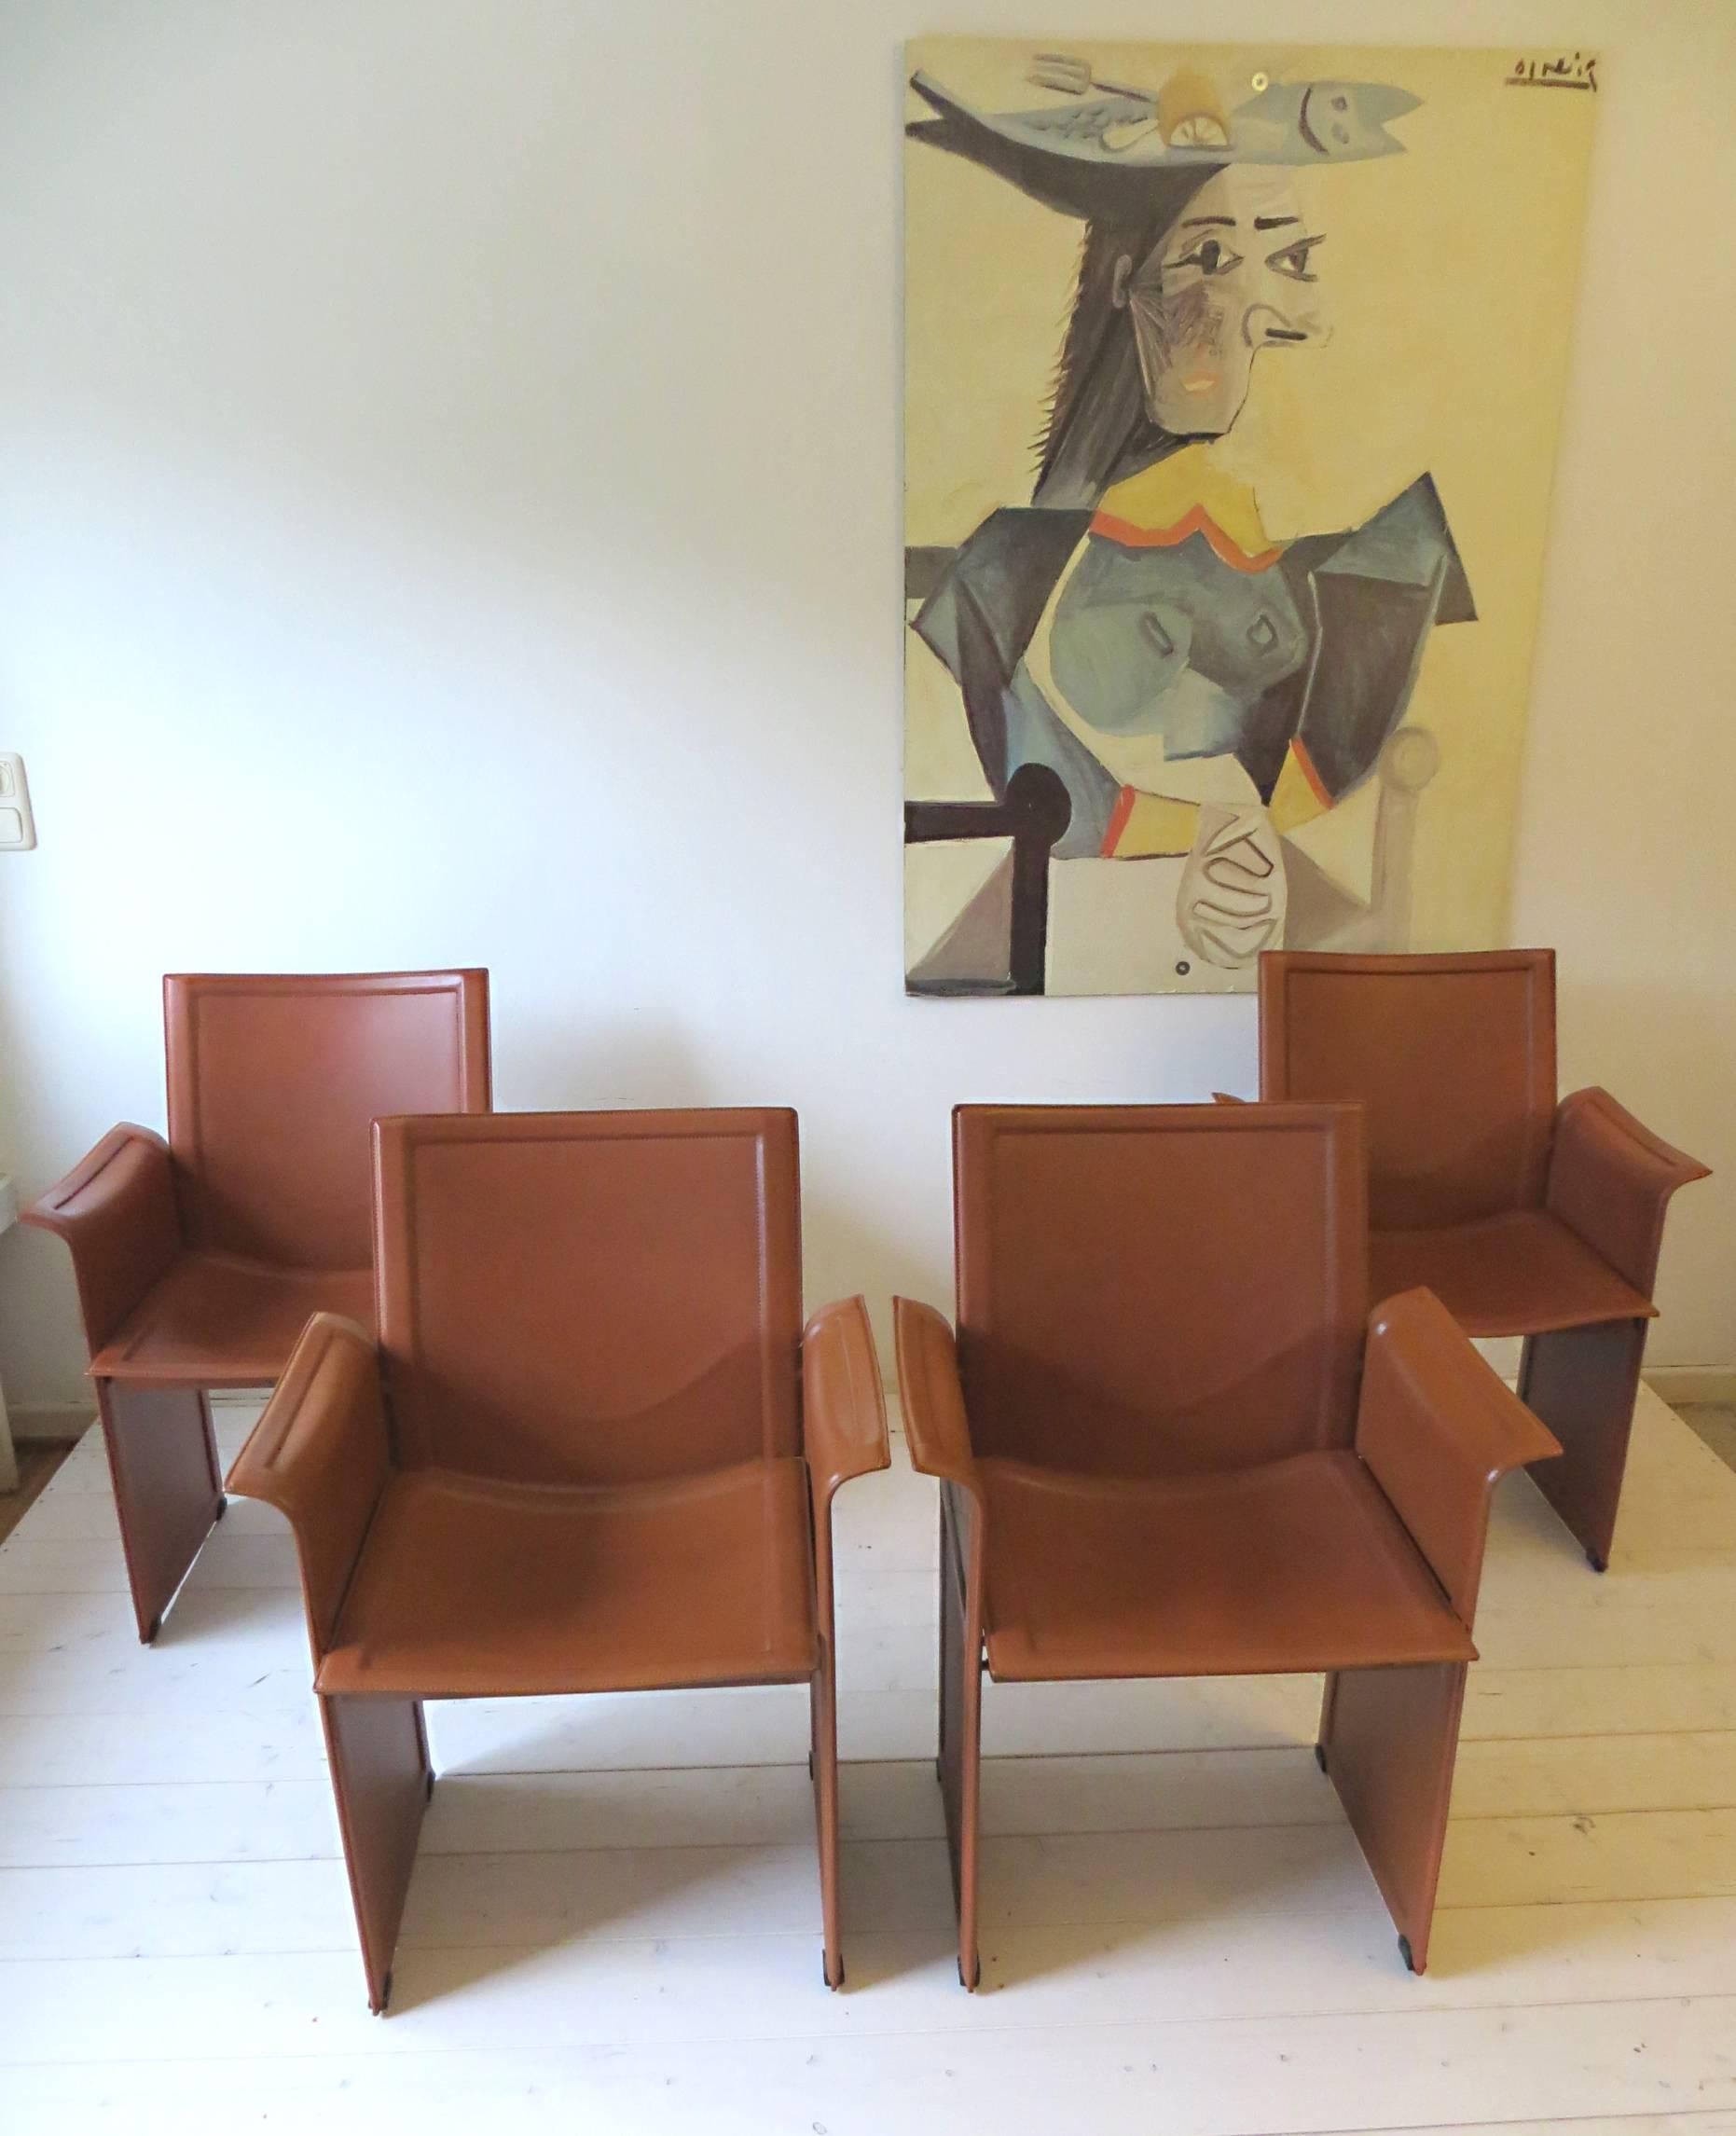 These Korium chairs are a Italian design classic from the 1970s. They are especially elegant in their minimalistic design. Korium KM1 designed by Tito Agnoli in 1978 - his main focus was Industrial design additionally he was an assistant for Gio